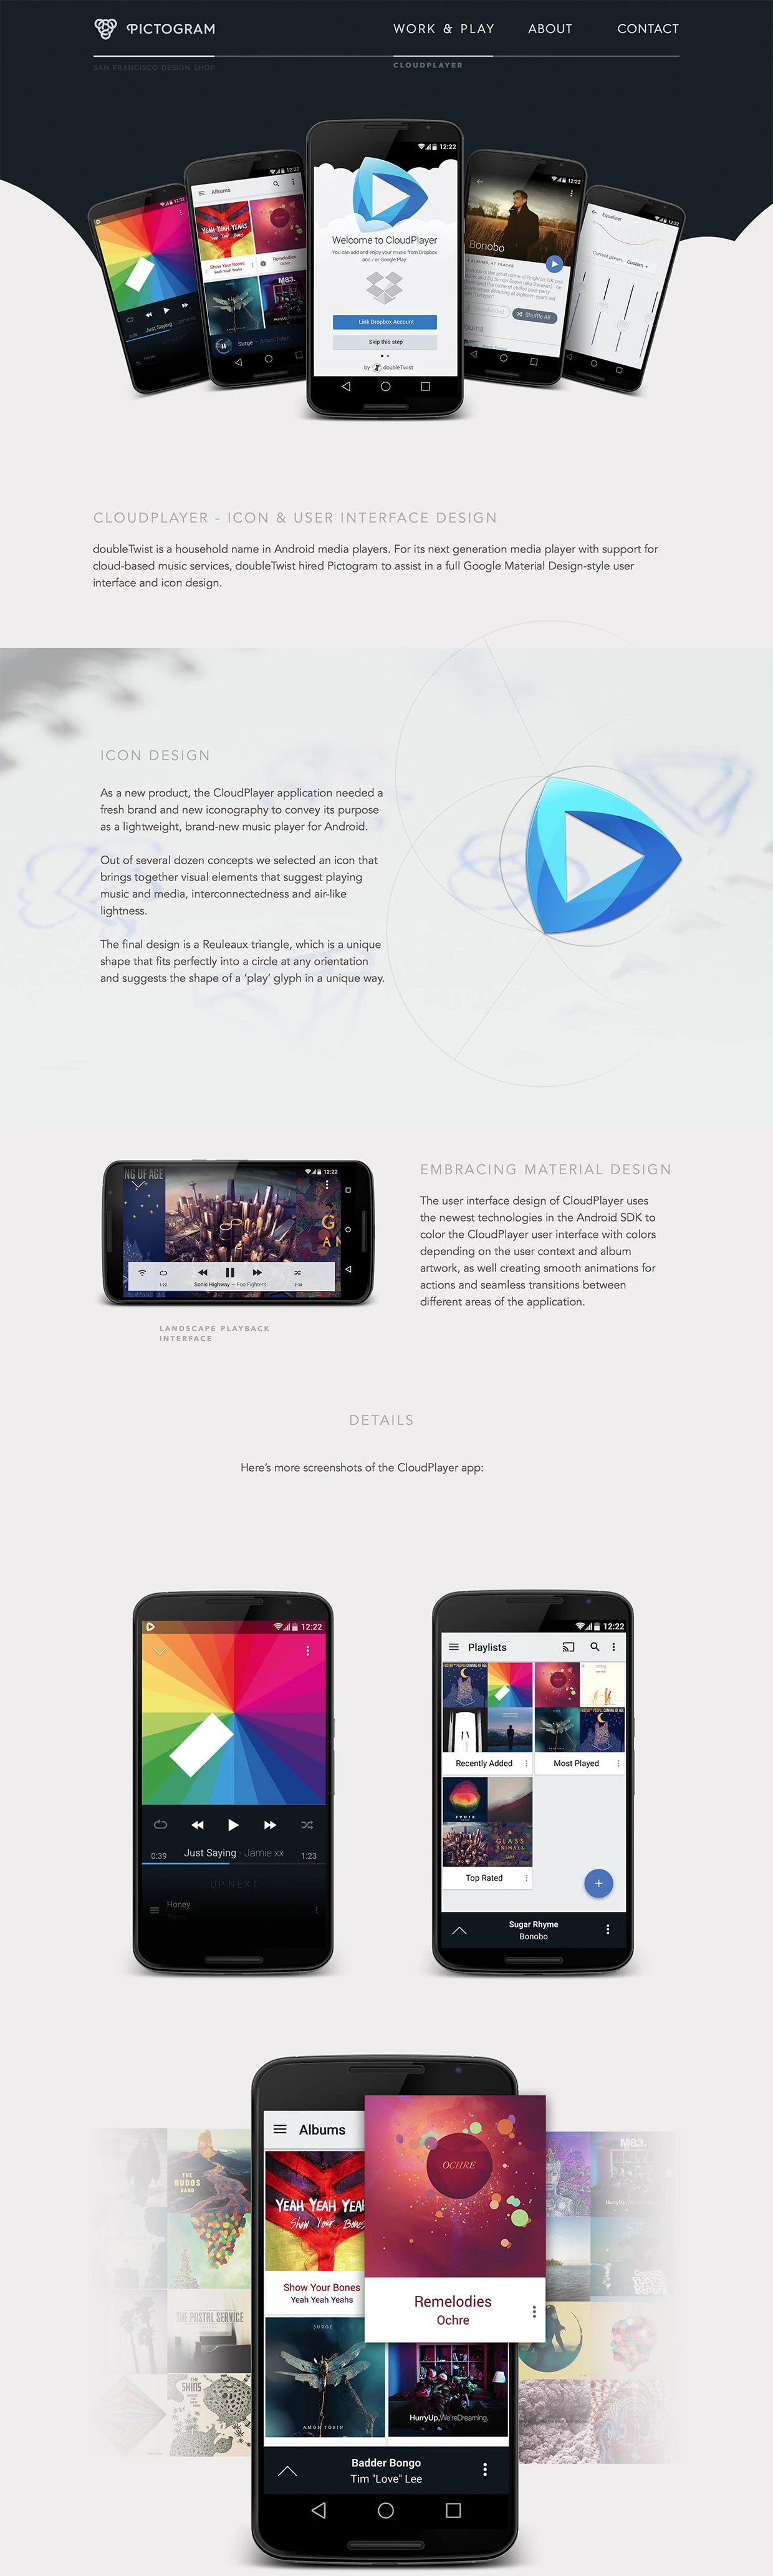 Cloud Player Landing Page Example: CloudPlayer - a doubleTwist app designed in stunning Material Design by Pictogram